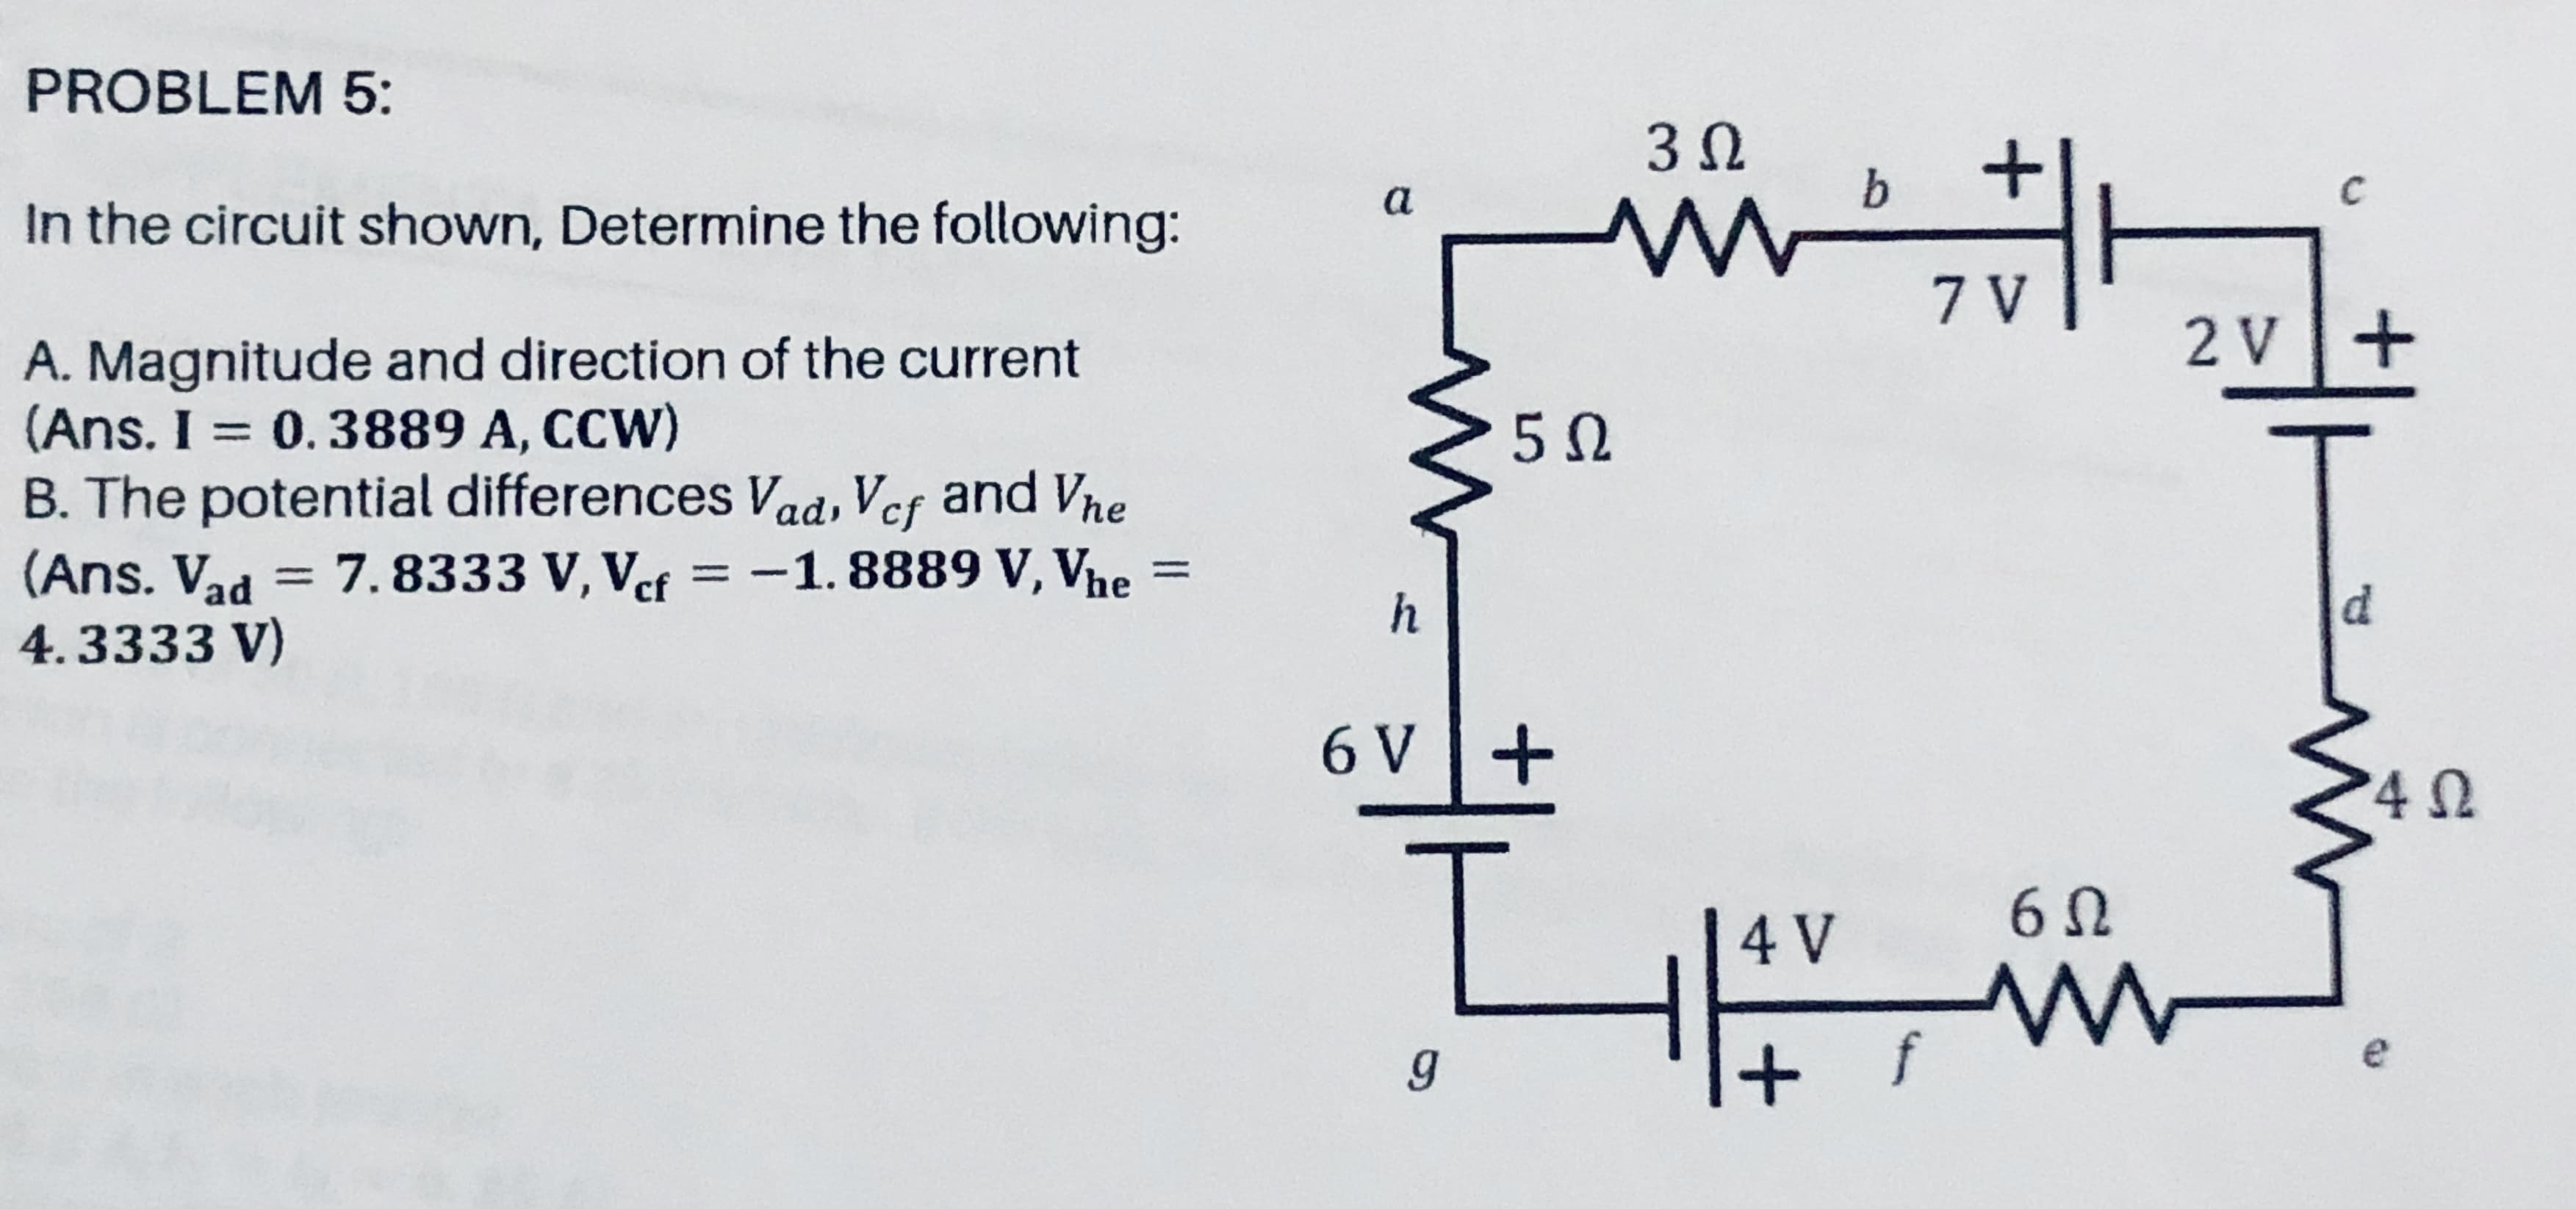 3 0
a
b
C
In the circuit shown, Determine the following:
7 V
2 v+
A. Magnitude and direction of the current
(Ans. I = 0.3889 A, CCW)
B. The potential differences Vad, Vef and Vhe
(Ans. Vad = 7.8333 V, Vef =-1.8889 V, Vhe
4.3333 V)
%3D
%3D
%3D
h
d.
6 V+
60
4 V
e
+ f
